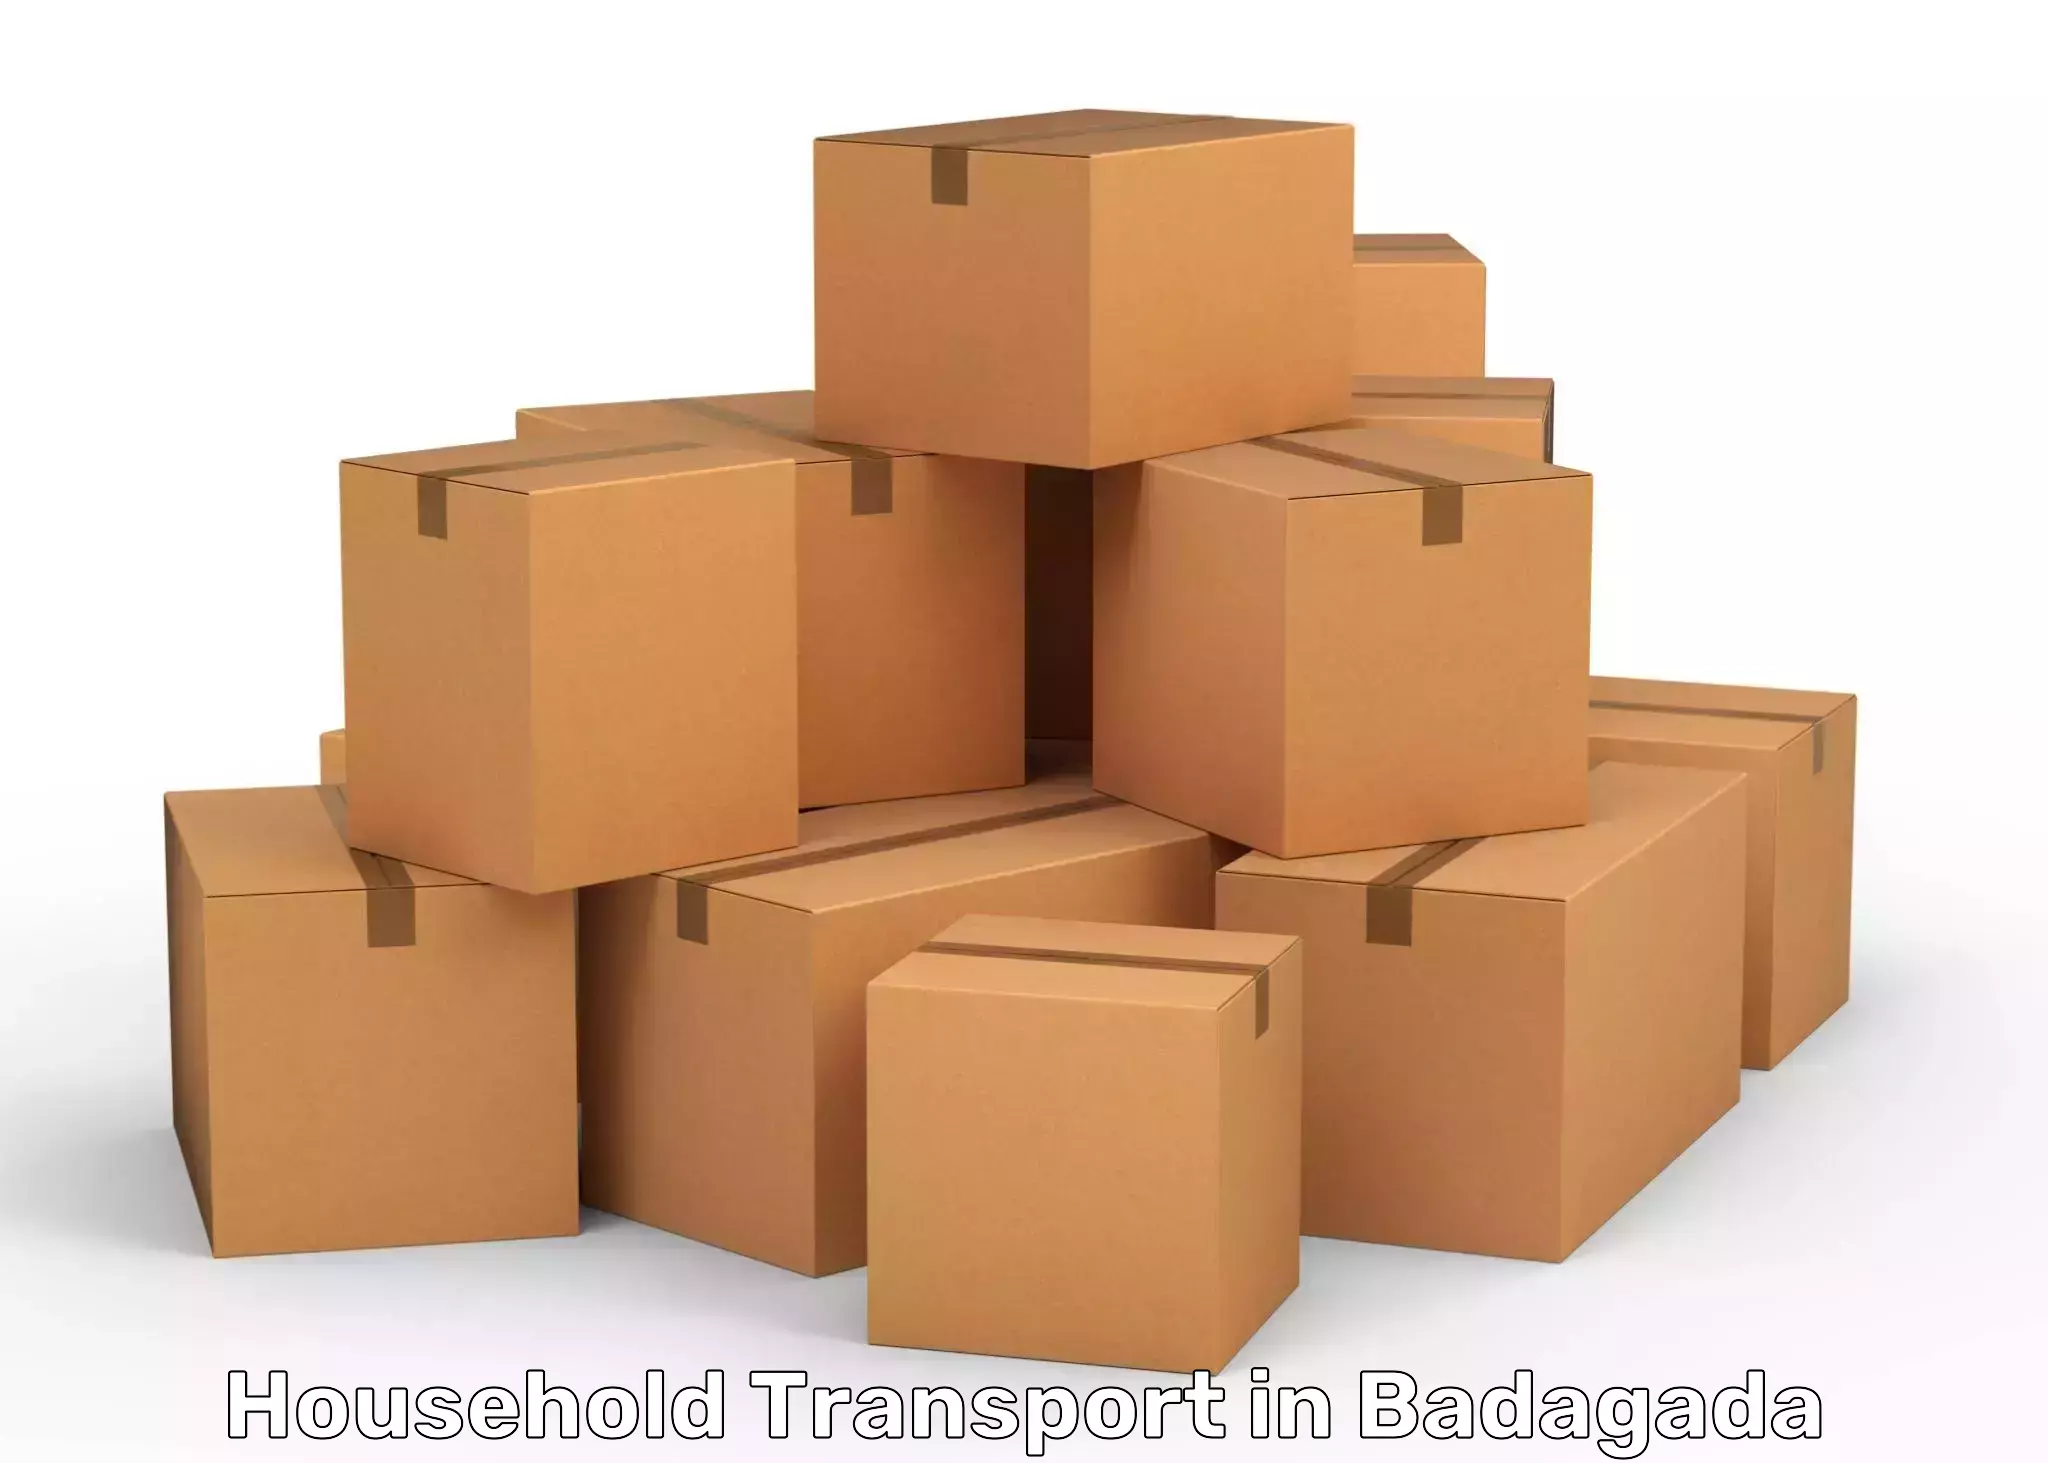 Long-distance moving services in Badagada